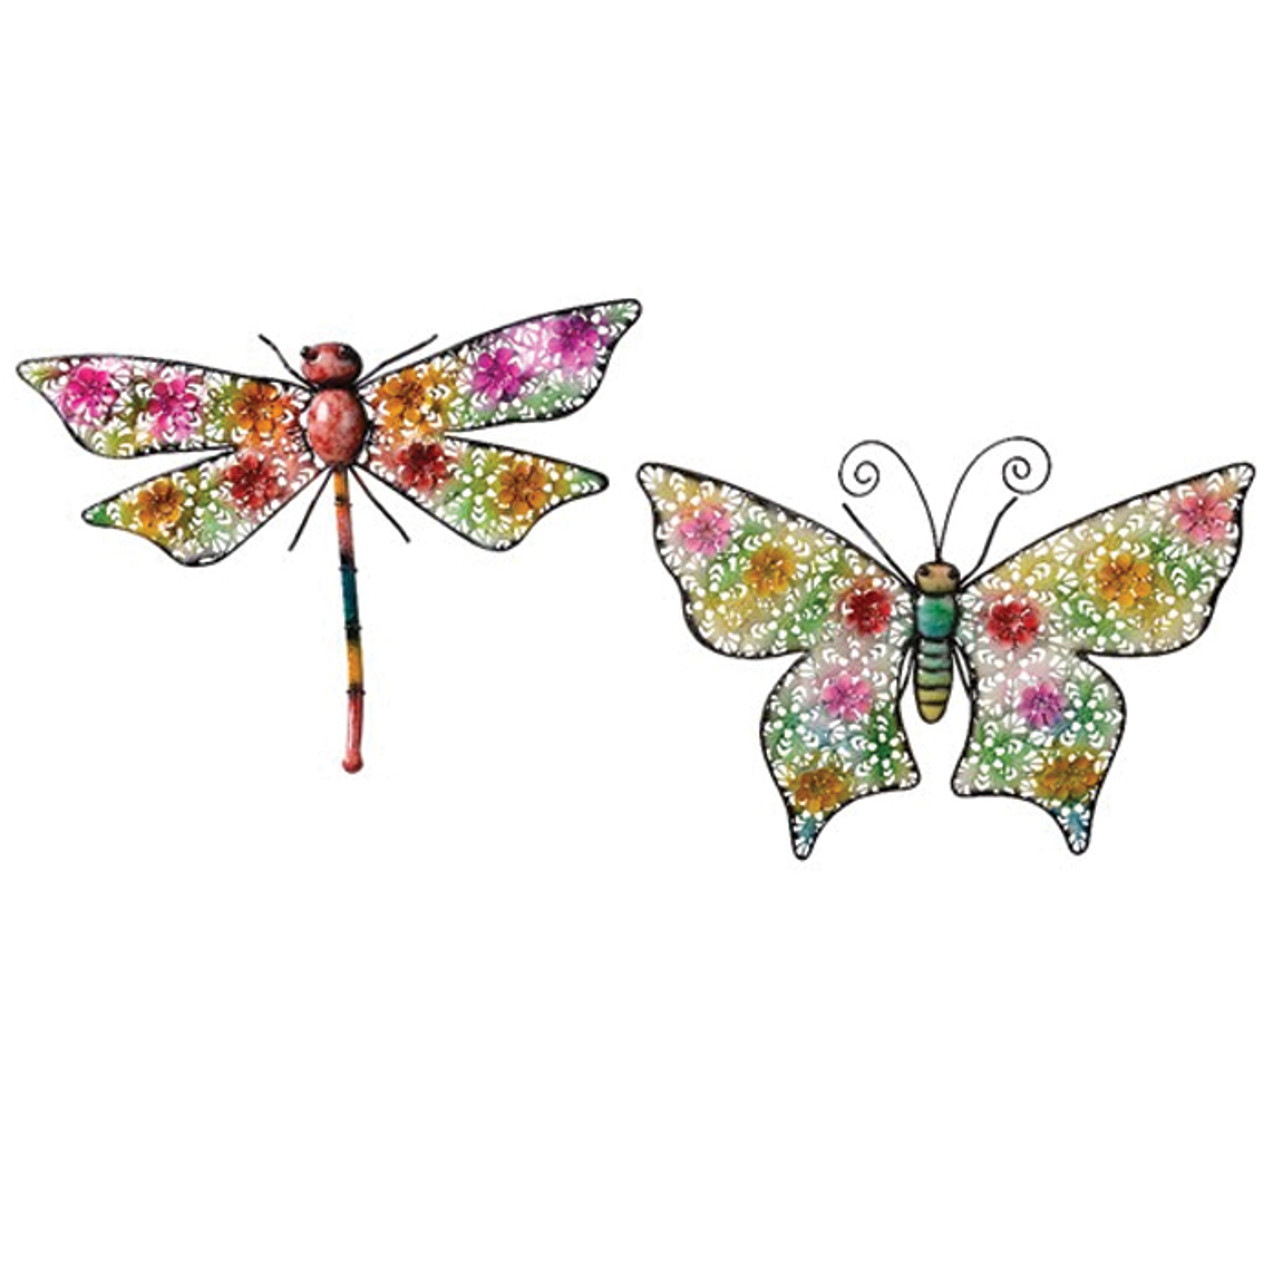 Iron Insect Wall Decoration - Dragonfly/Butterfly 47cm (Qty 1)